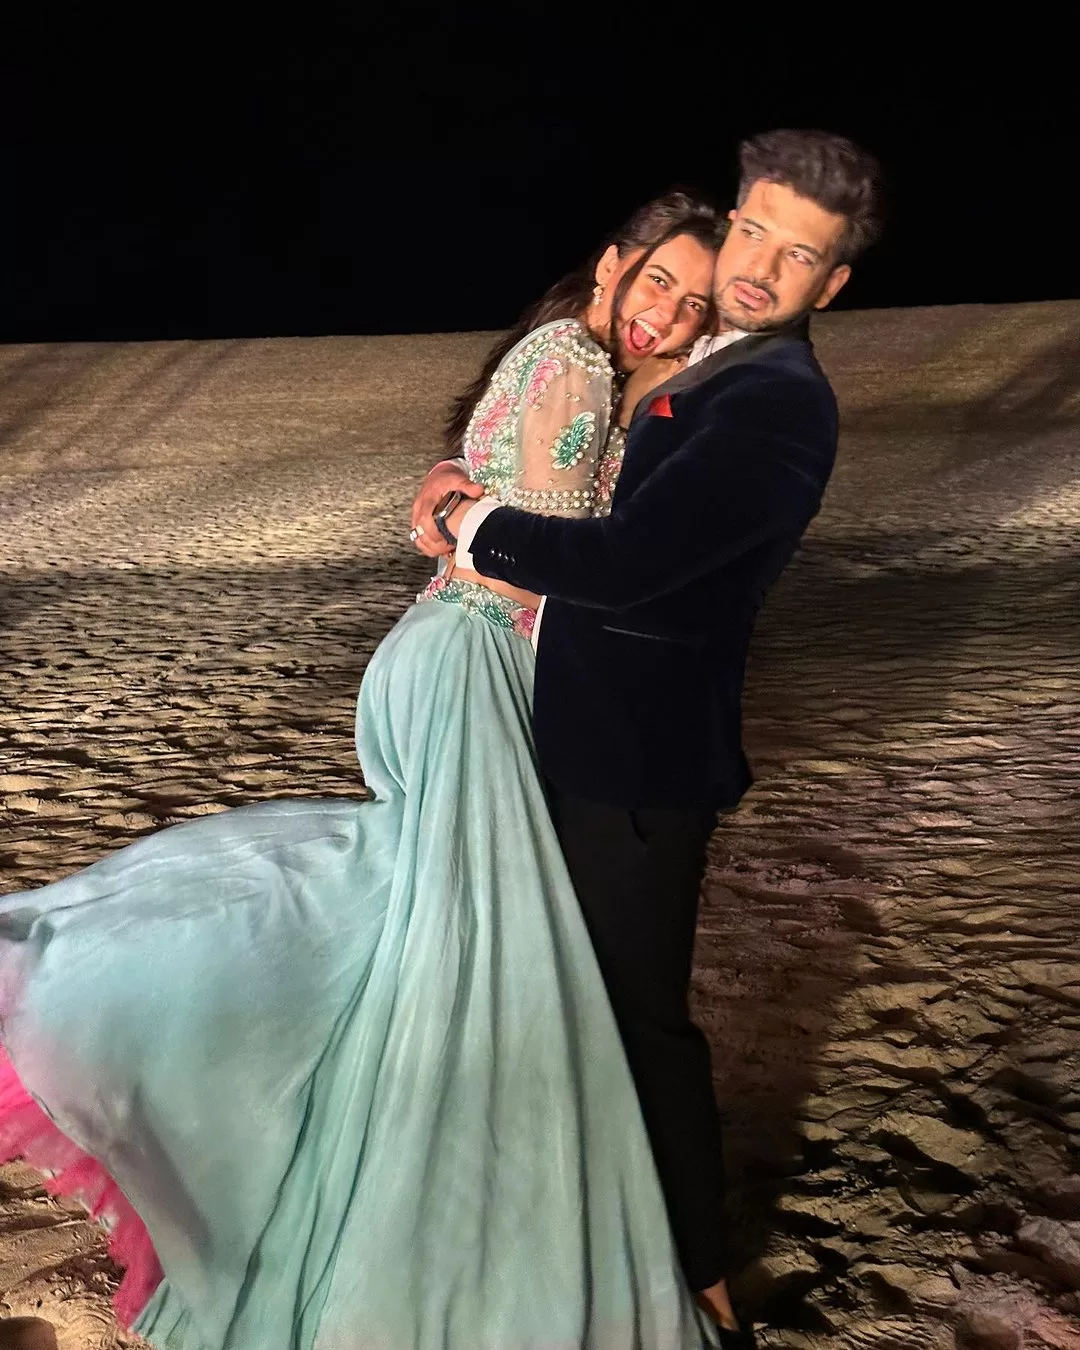 "Is Karan Kundrra Finally Ready to Tie the Knot with Tejasswi Prakash? His Latest Comments Raise Eyebrows!"